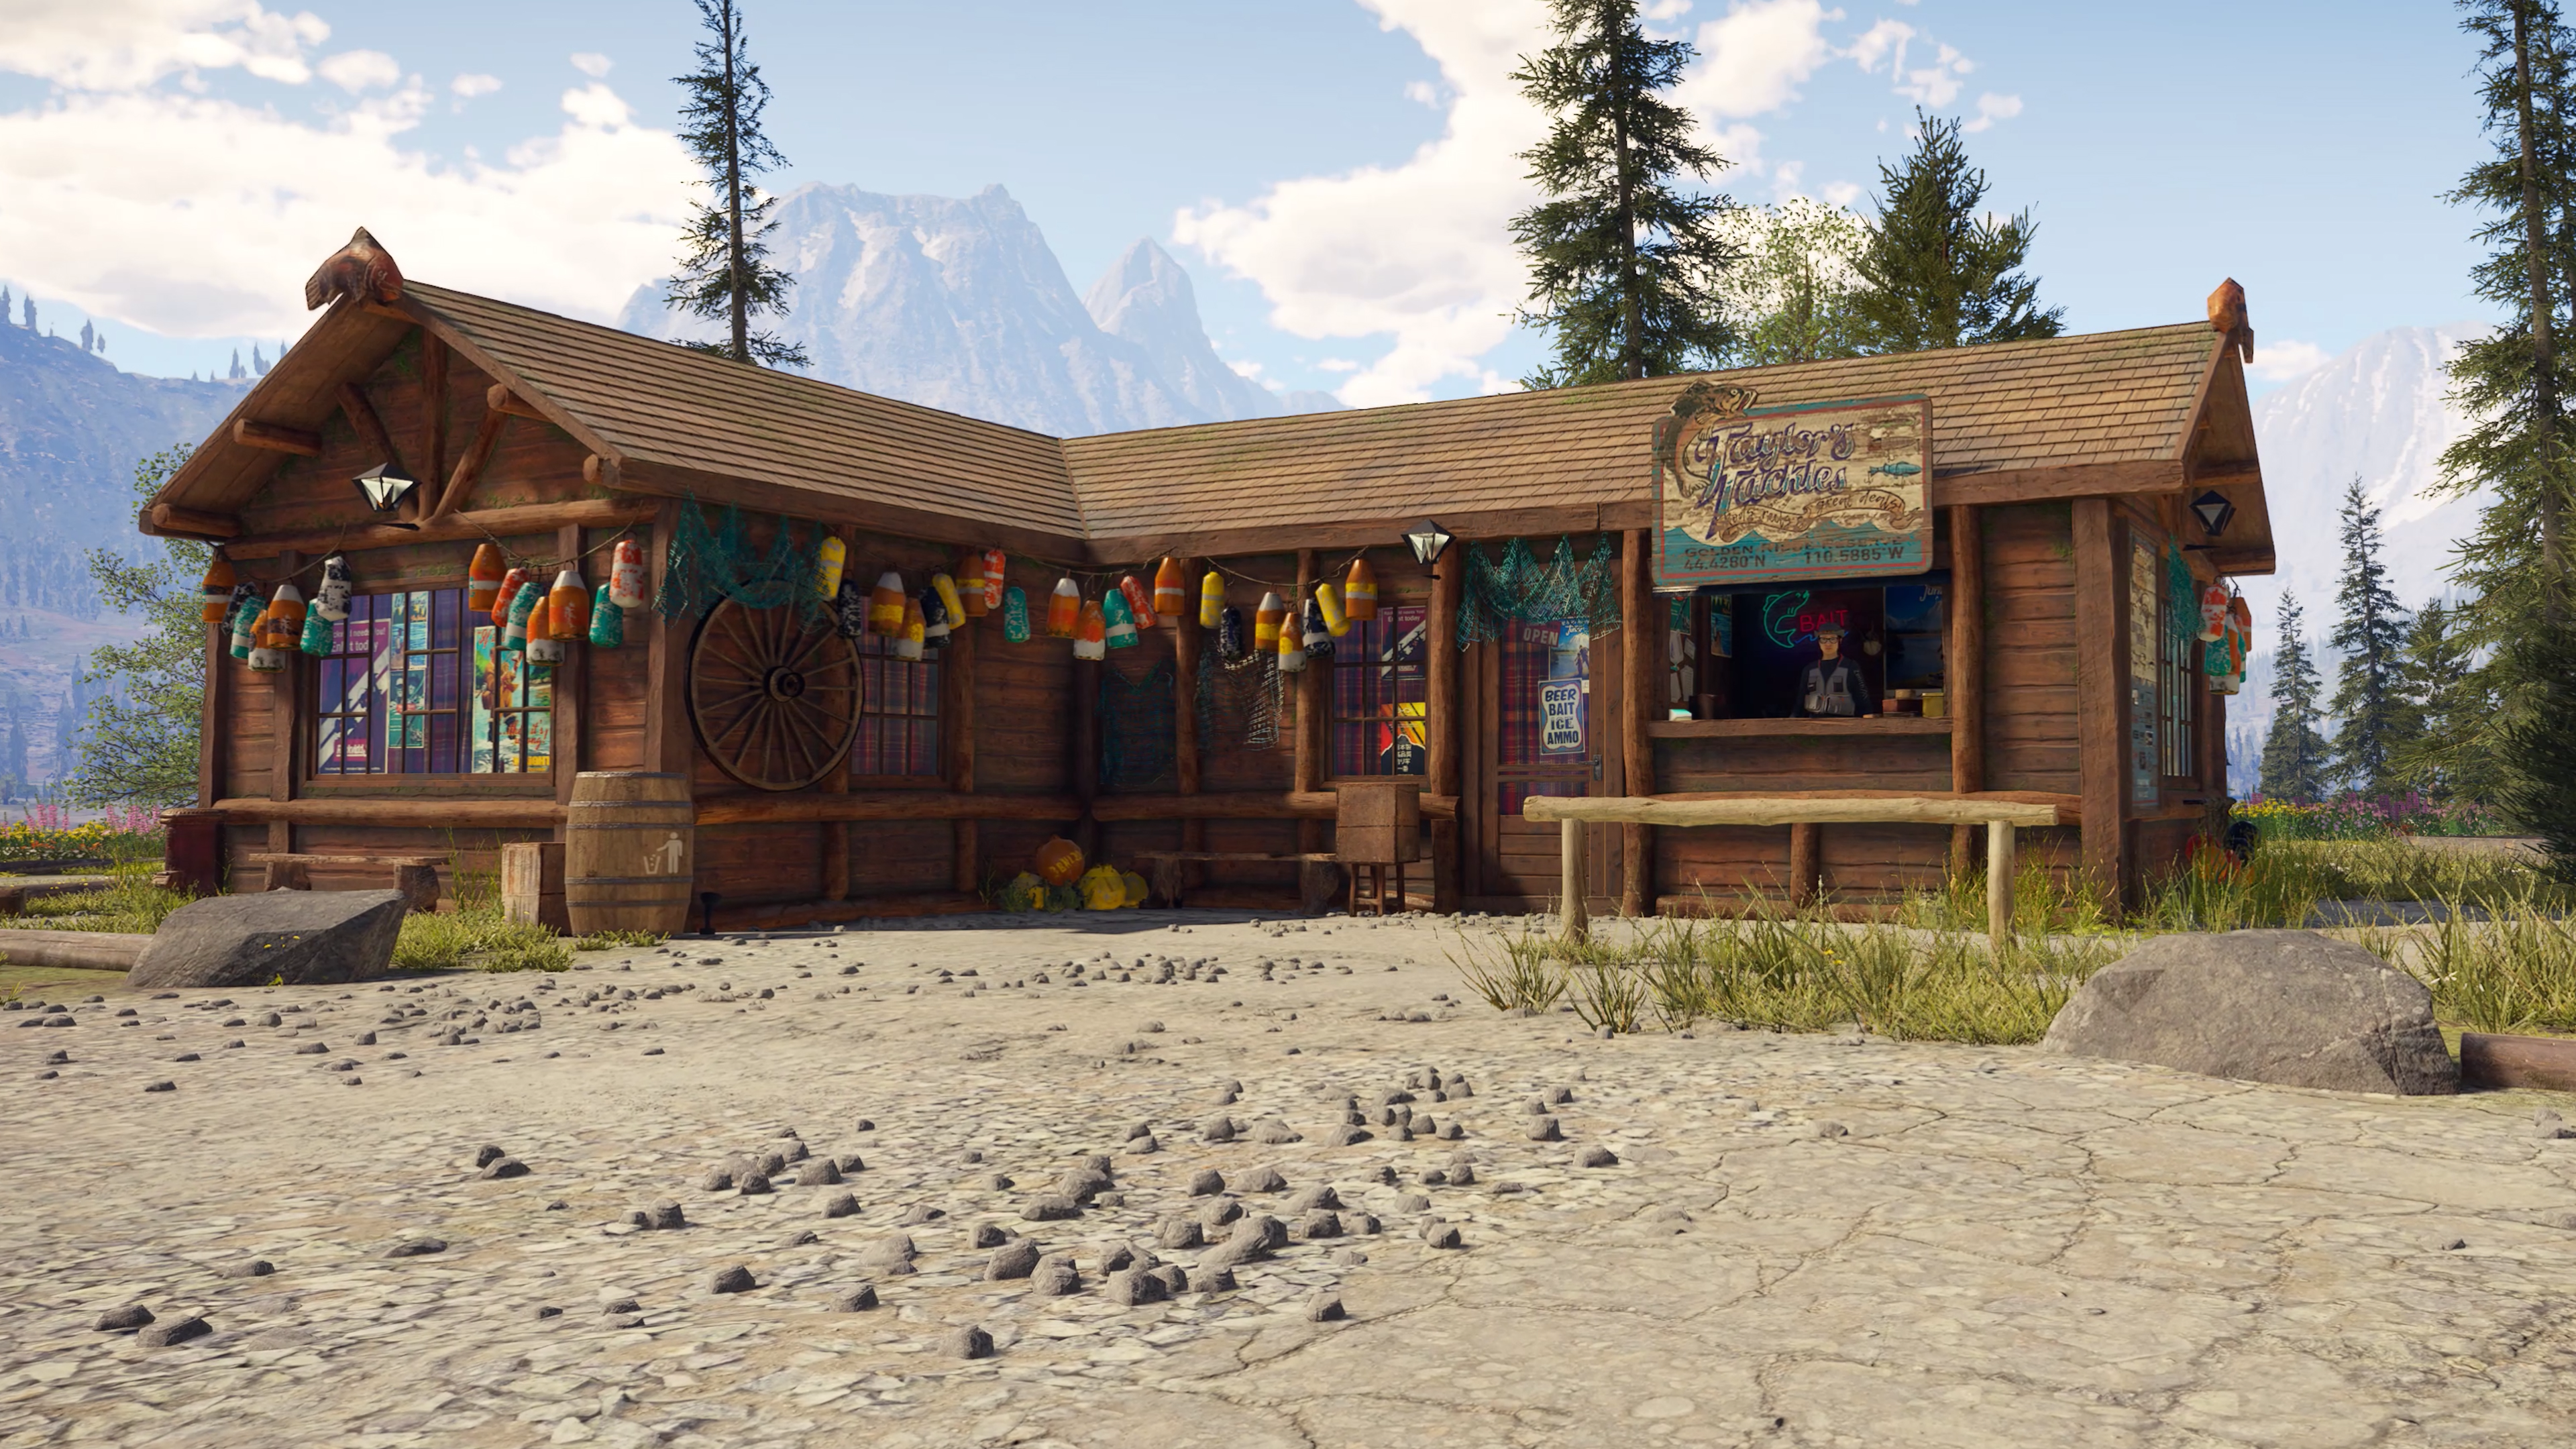 Taylor's Tackle Shop at Diamond's Peak Outpost.